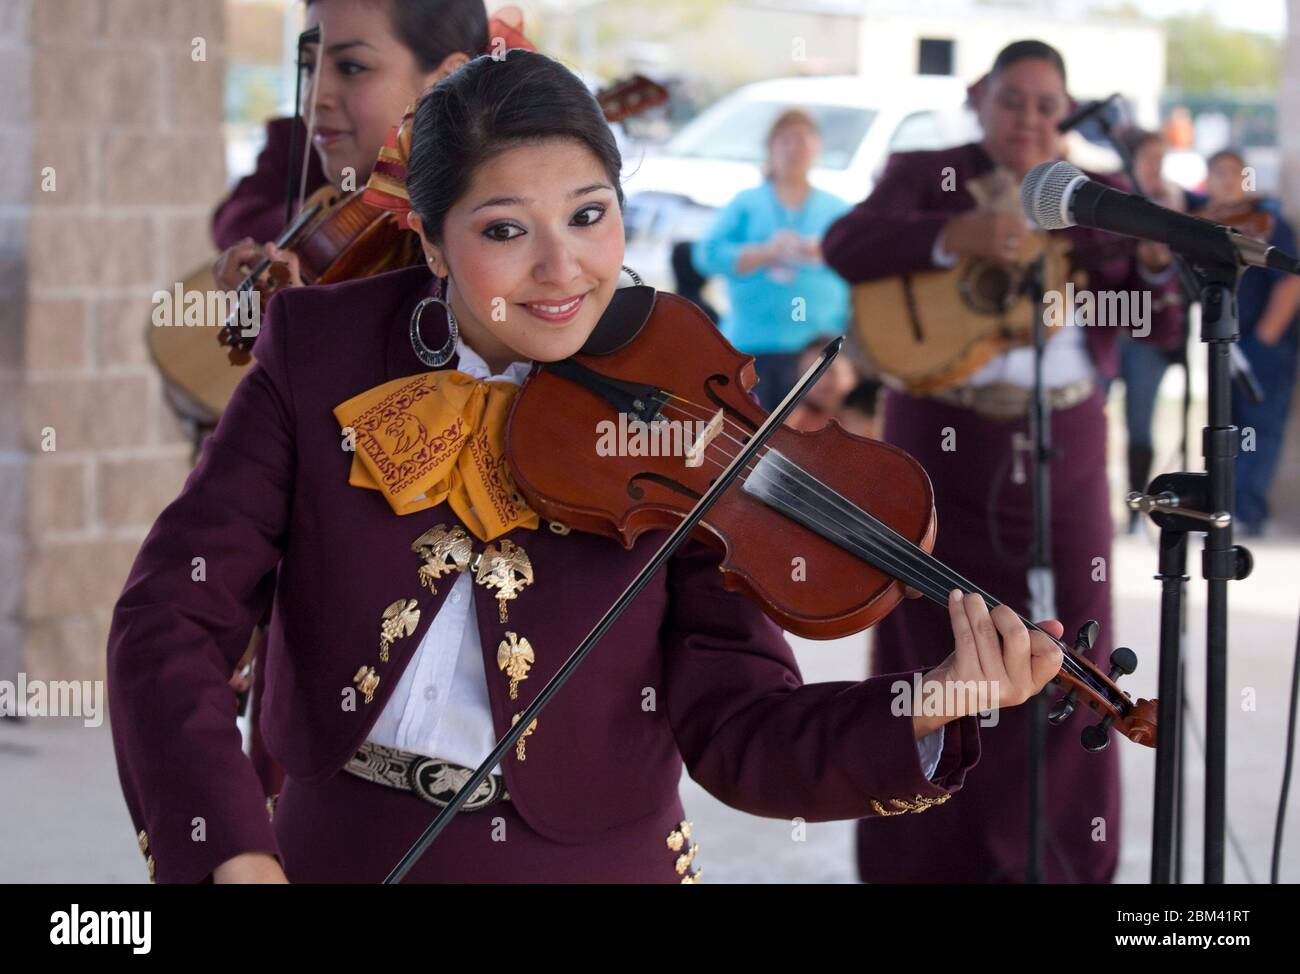 Kyle, Texas USA, November 2011: Members of Mariachi Nueva Generacion from Texas State University perform at a 'Day of the Dead' or Dia de Los Muertos celebration. Day of the Dead is a Mexican national holiday and focuses on gatherings of family and friends to pray for a departed loved ones. ©Bob Daemmrich Stock Photo